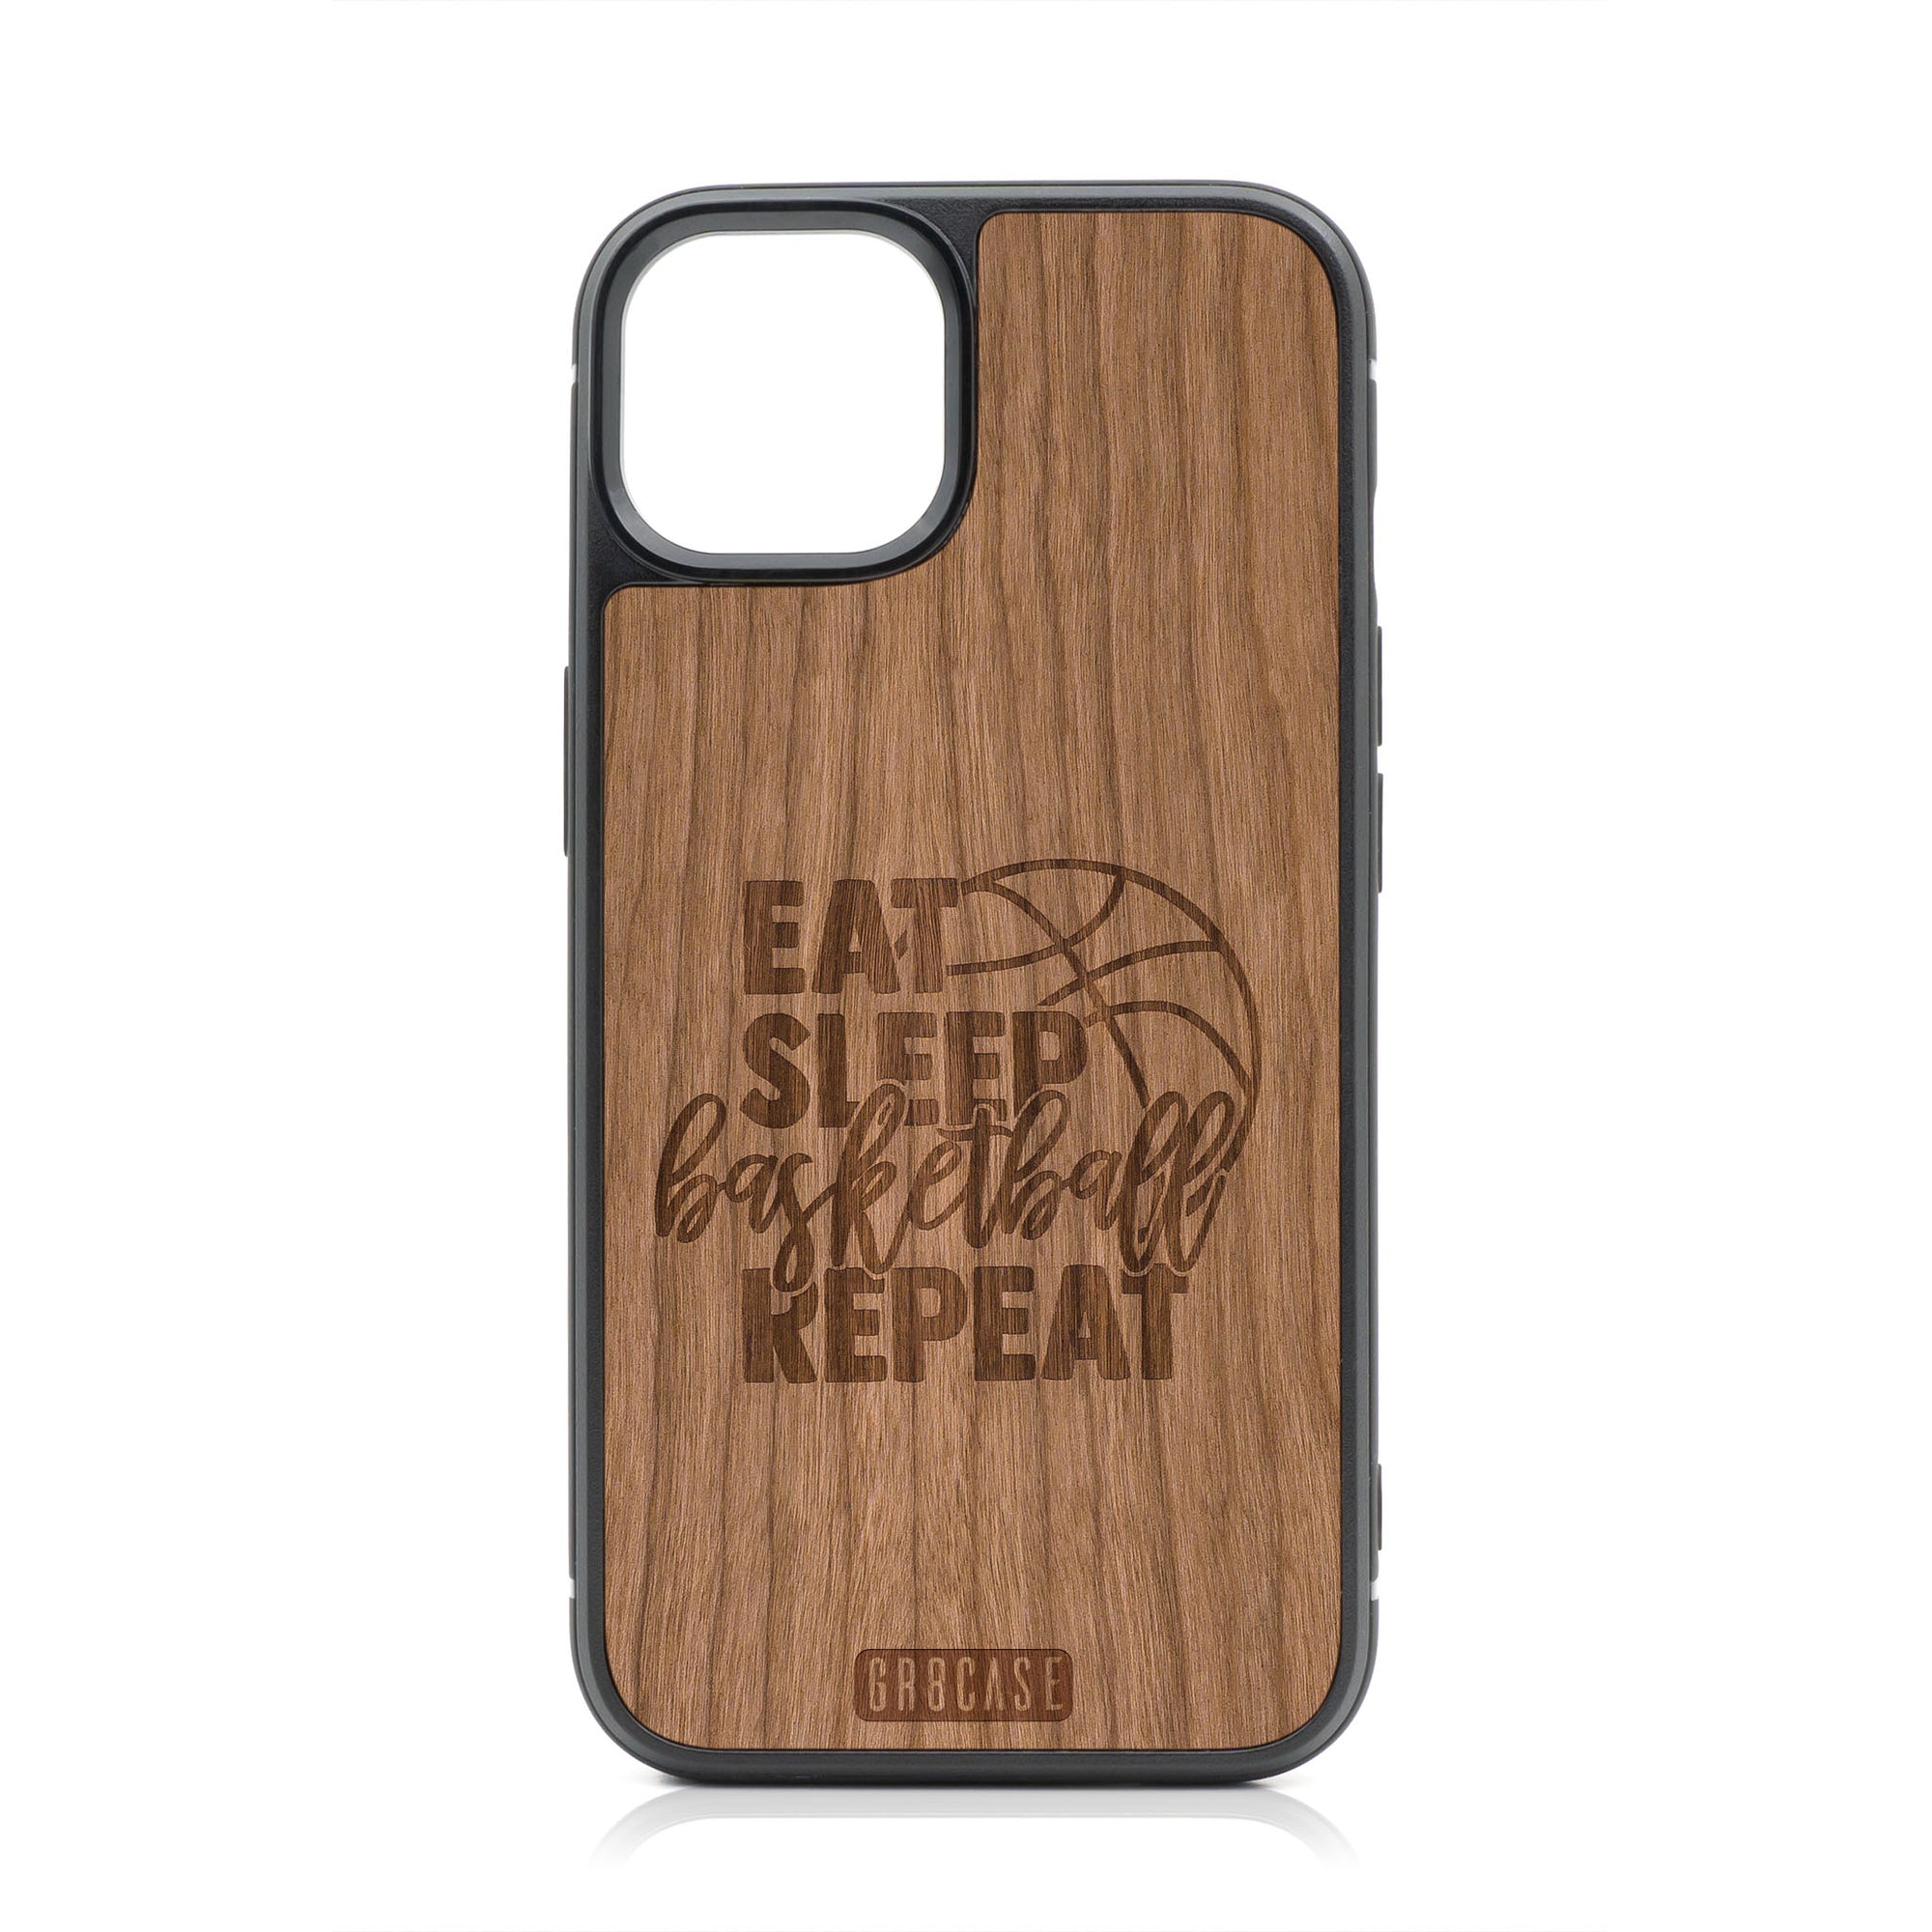 Eat Sleep Basketball Repeat Design Wood Case For iPhone 13